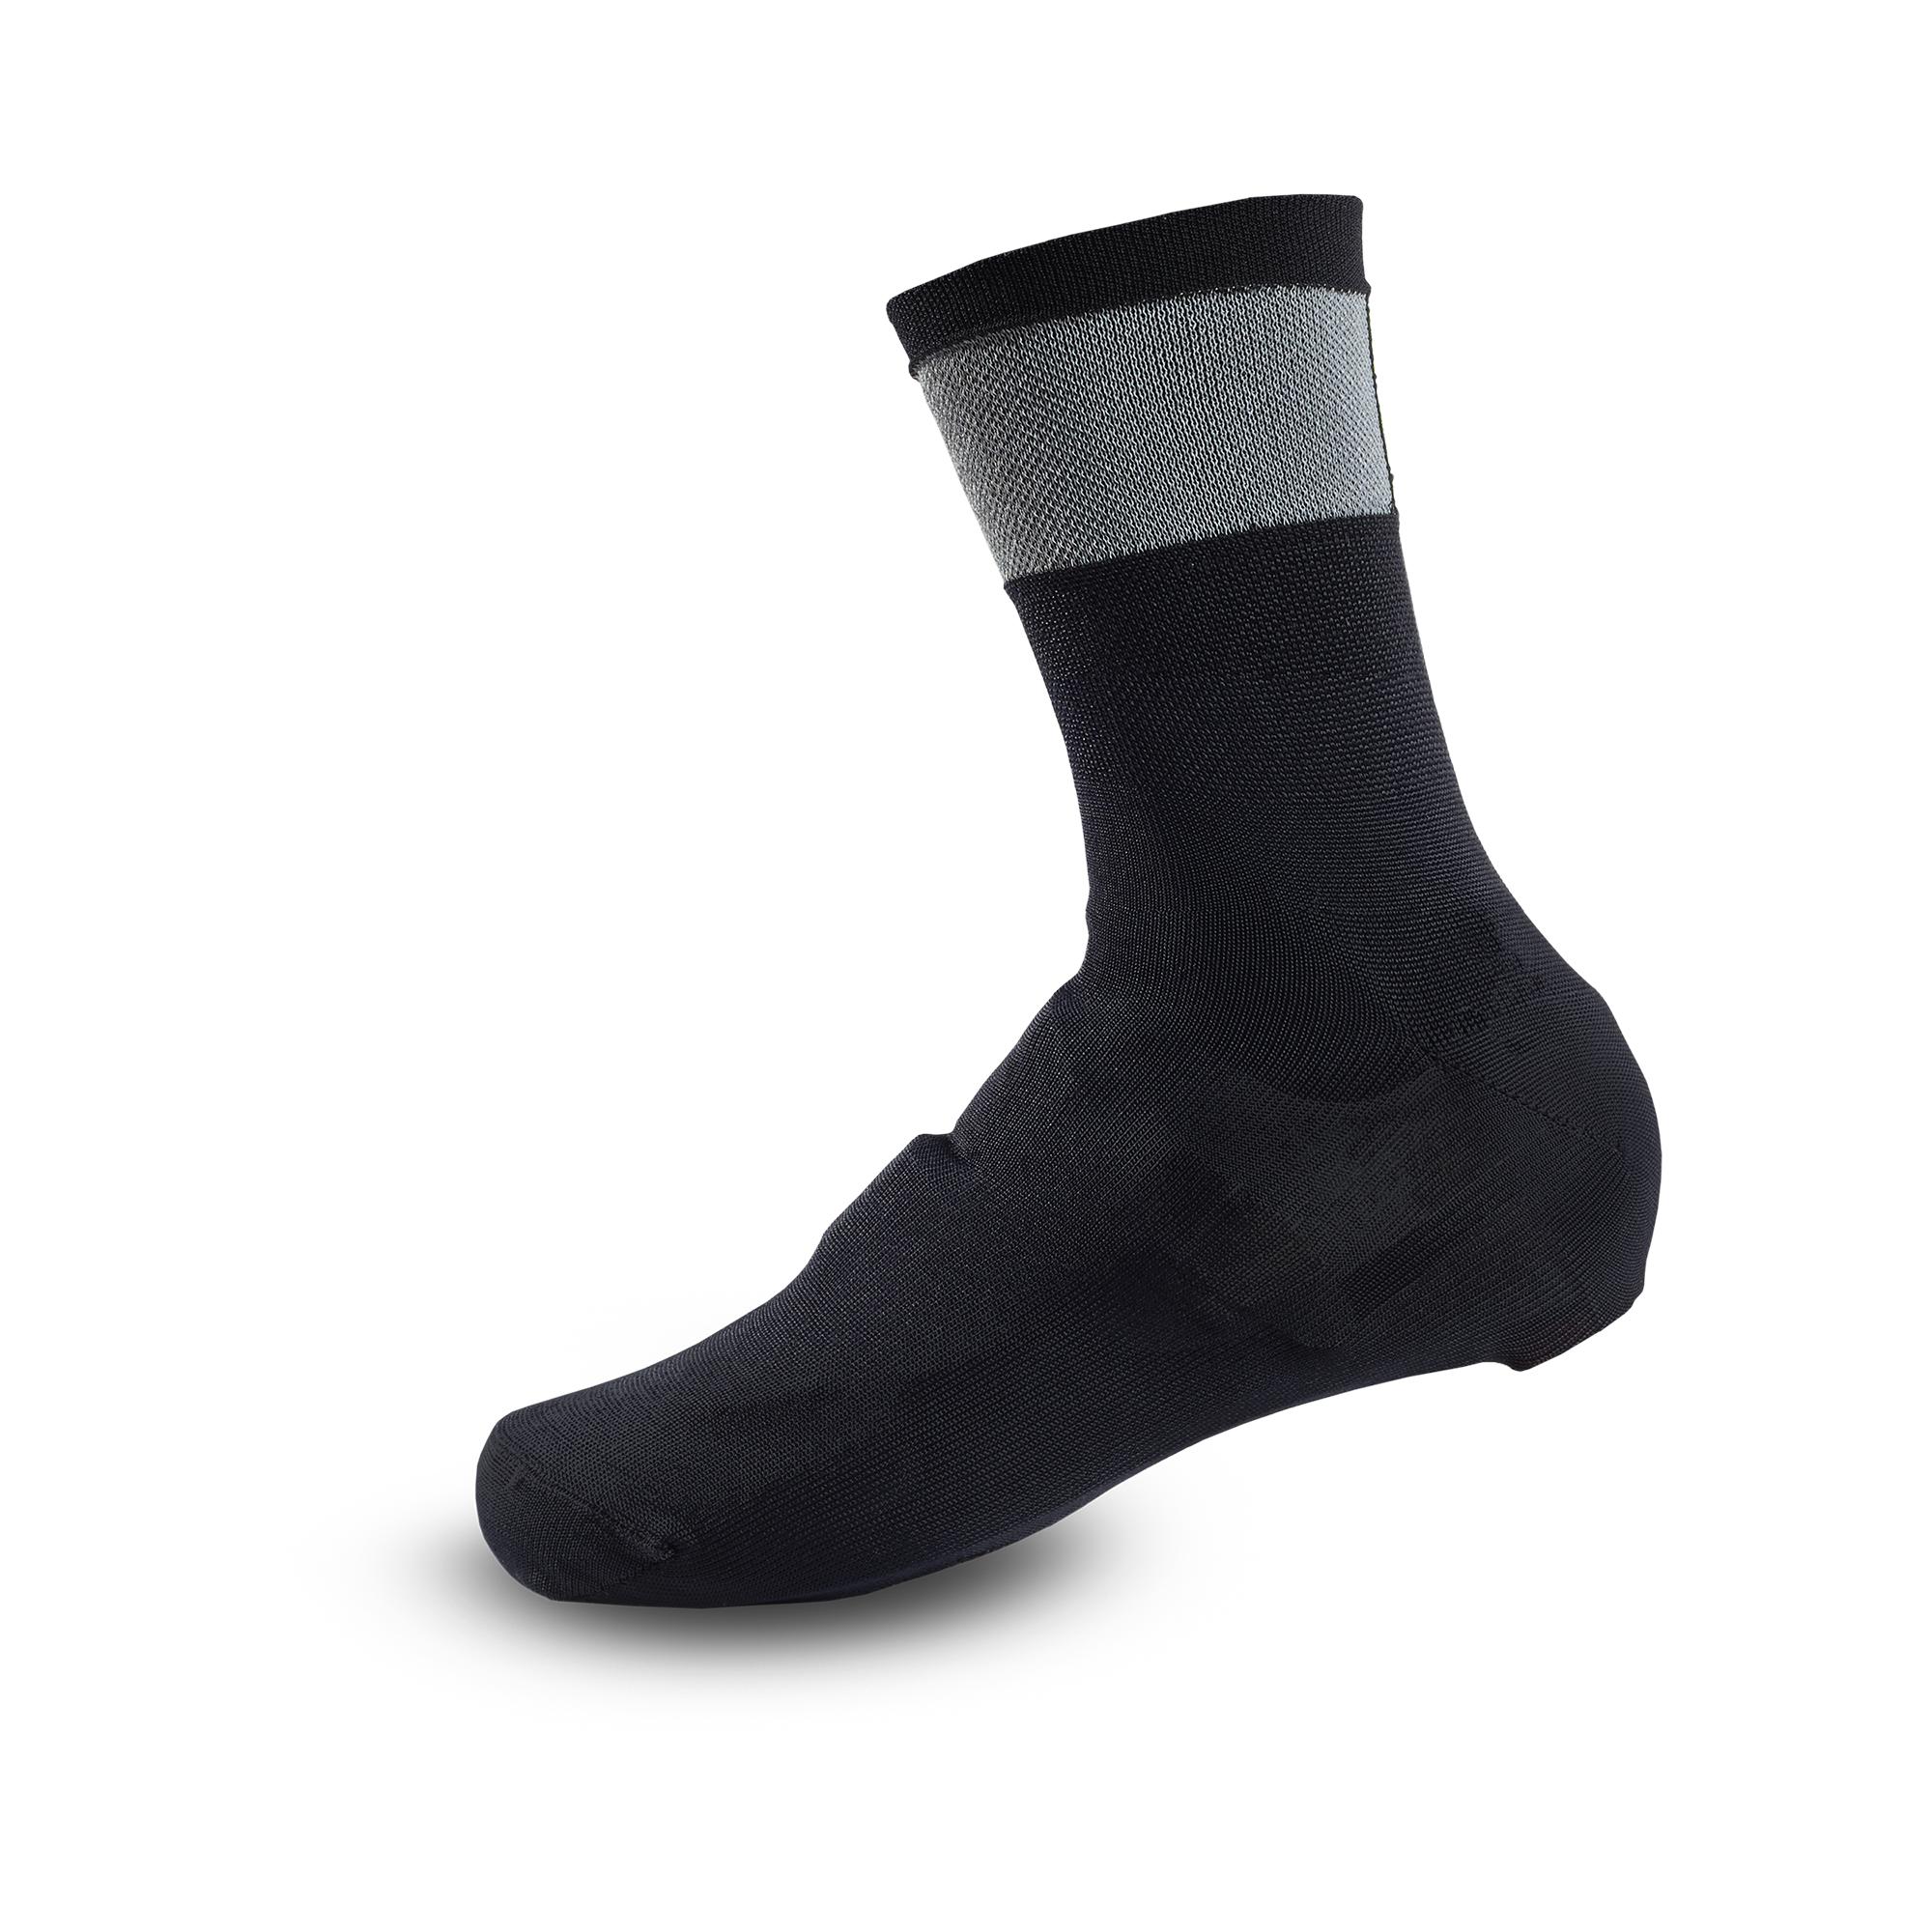 Knitted Cycling Overshoes - Black 7/8